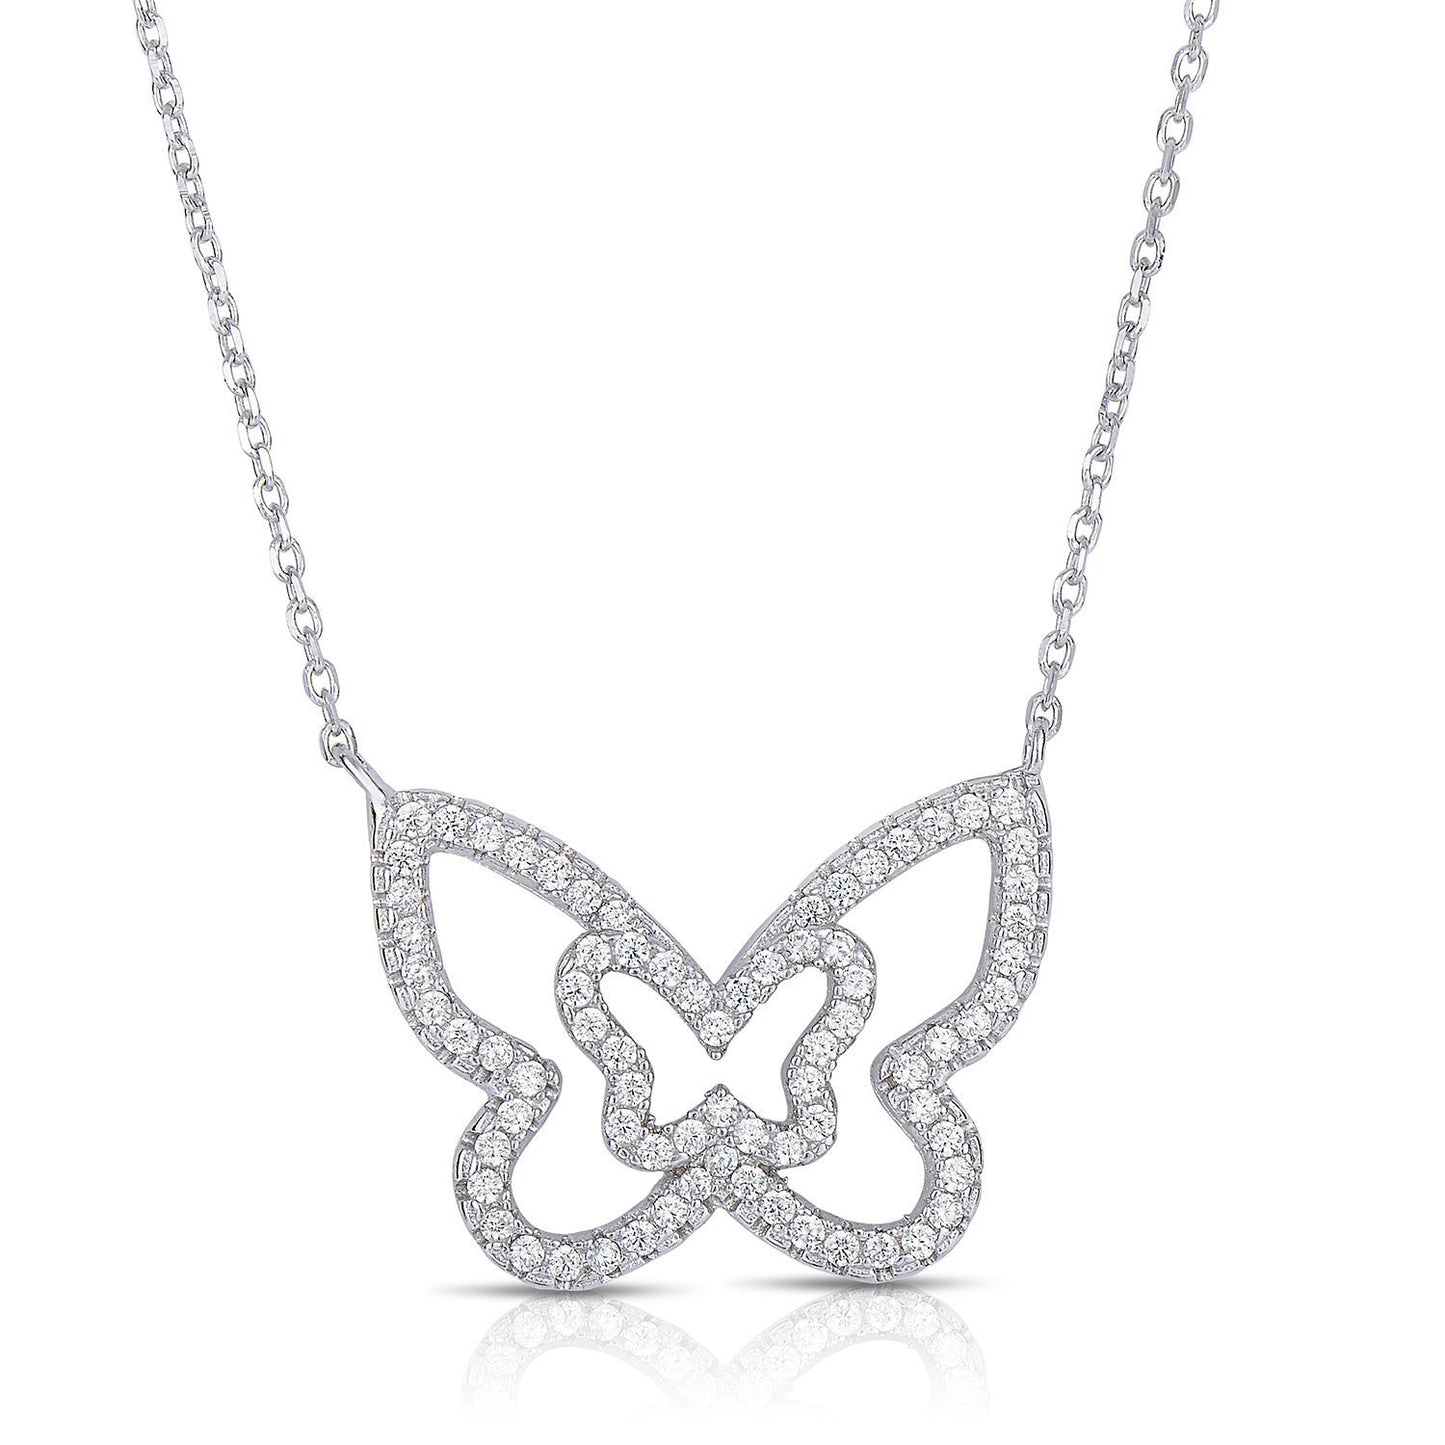 Sterling Silver Double Butterfly Necklace, Adjustable